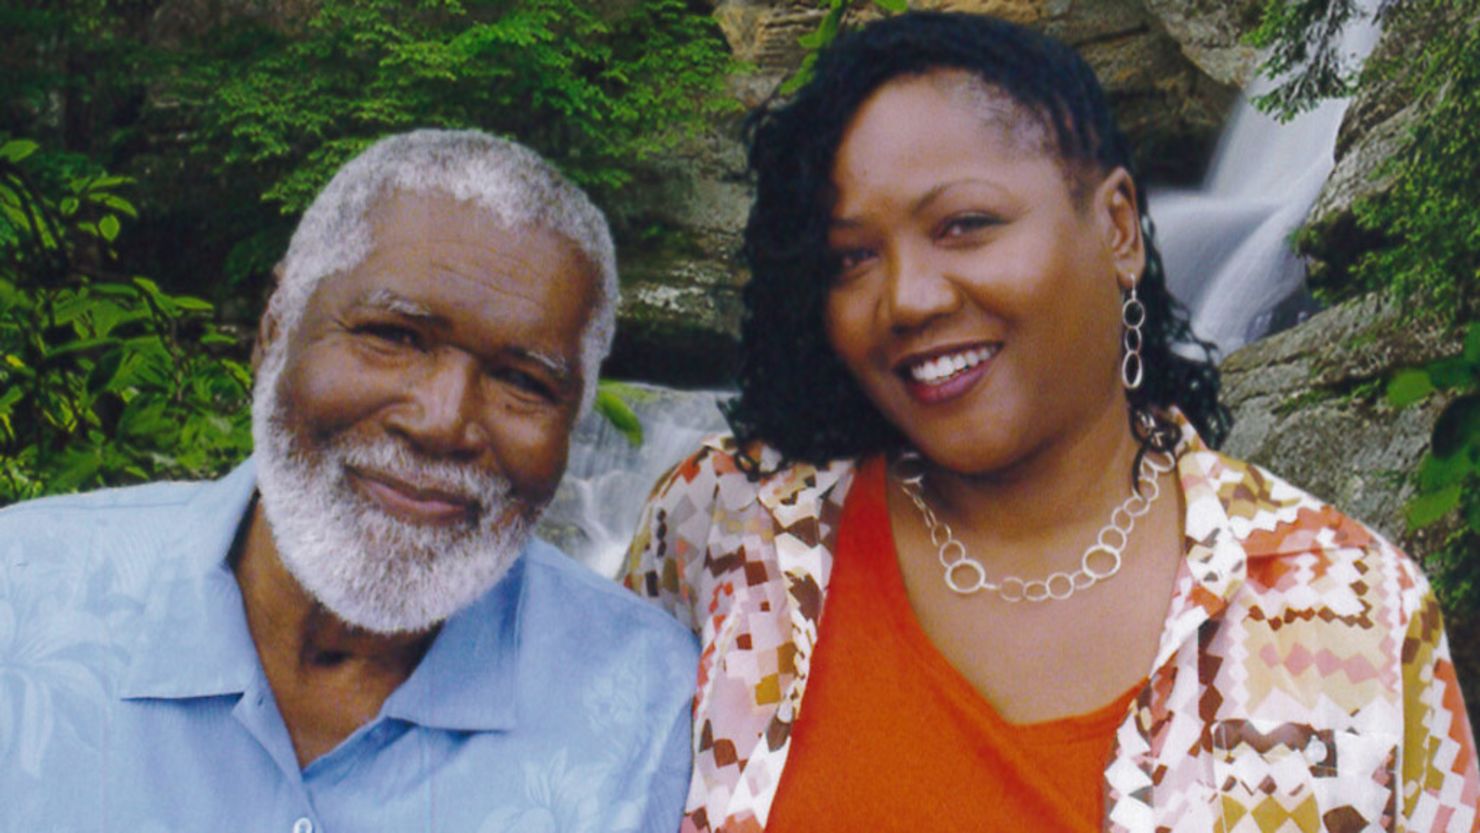 Felicia Hudson is learning to live with her father, Alvin, after taking him out of a nursing home in 2008.